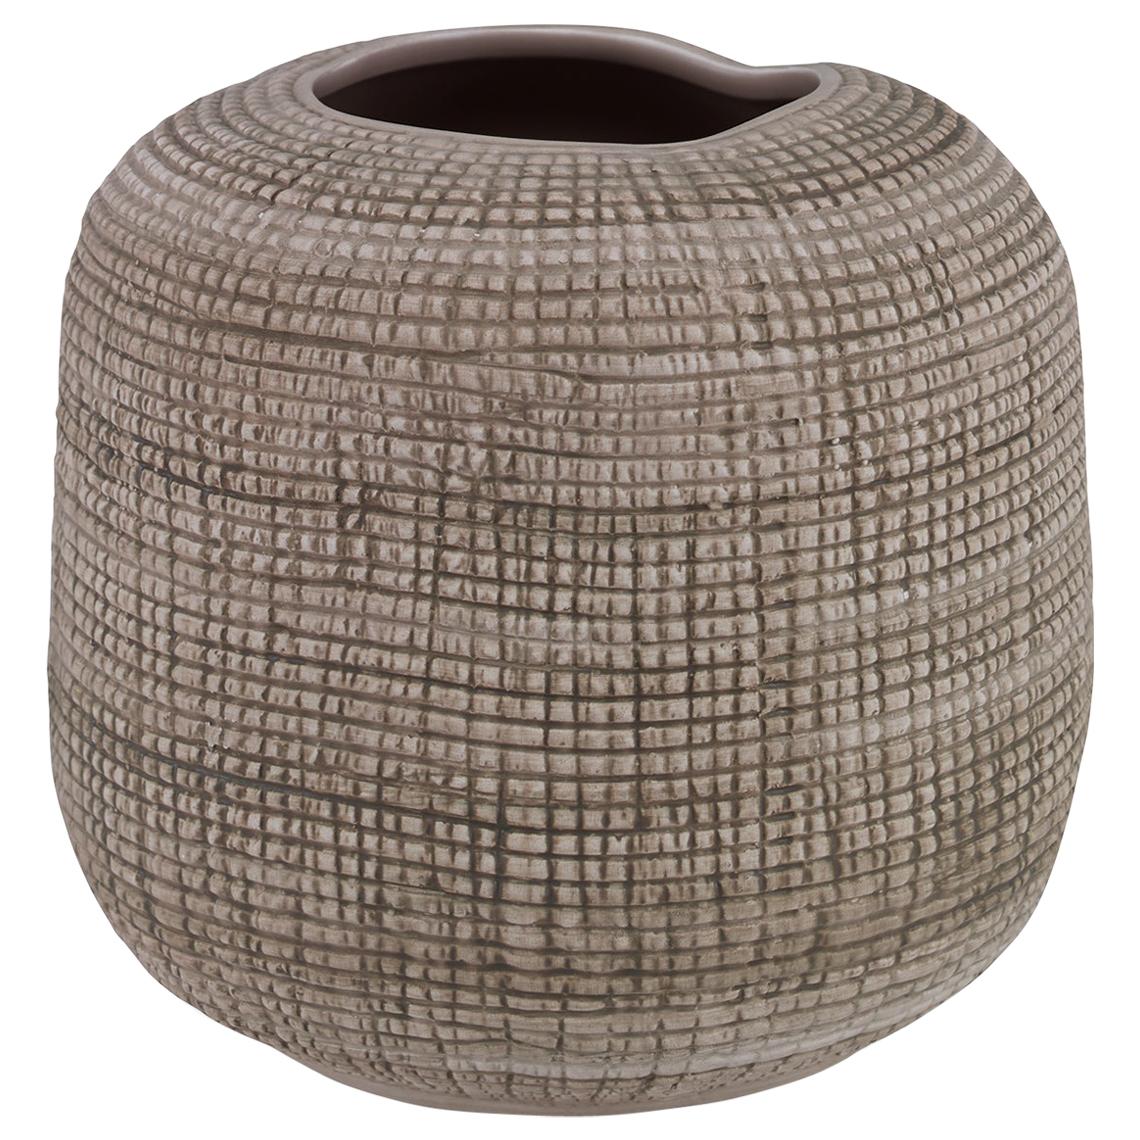 Barcelos Small Vase in Natural Ceramic by CuratedKravet